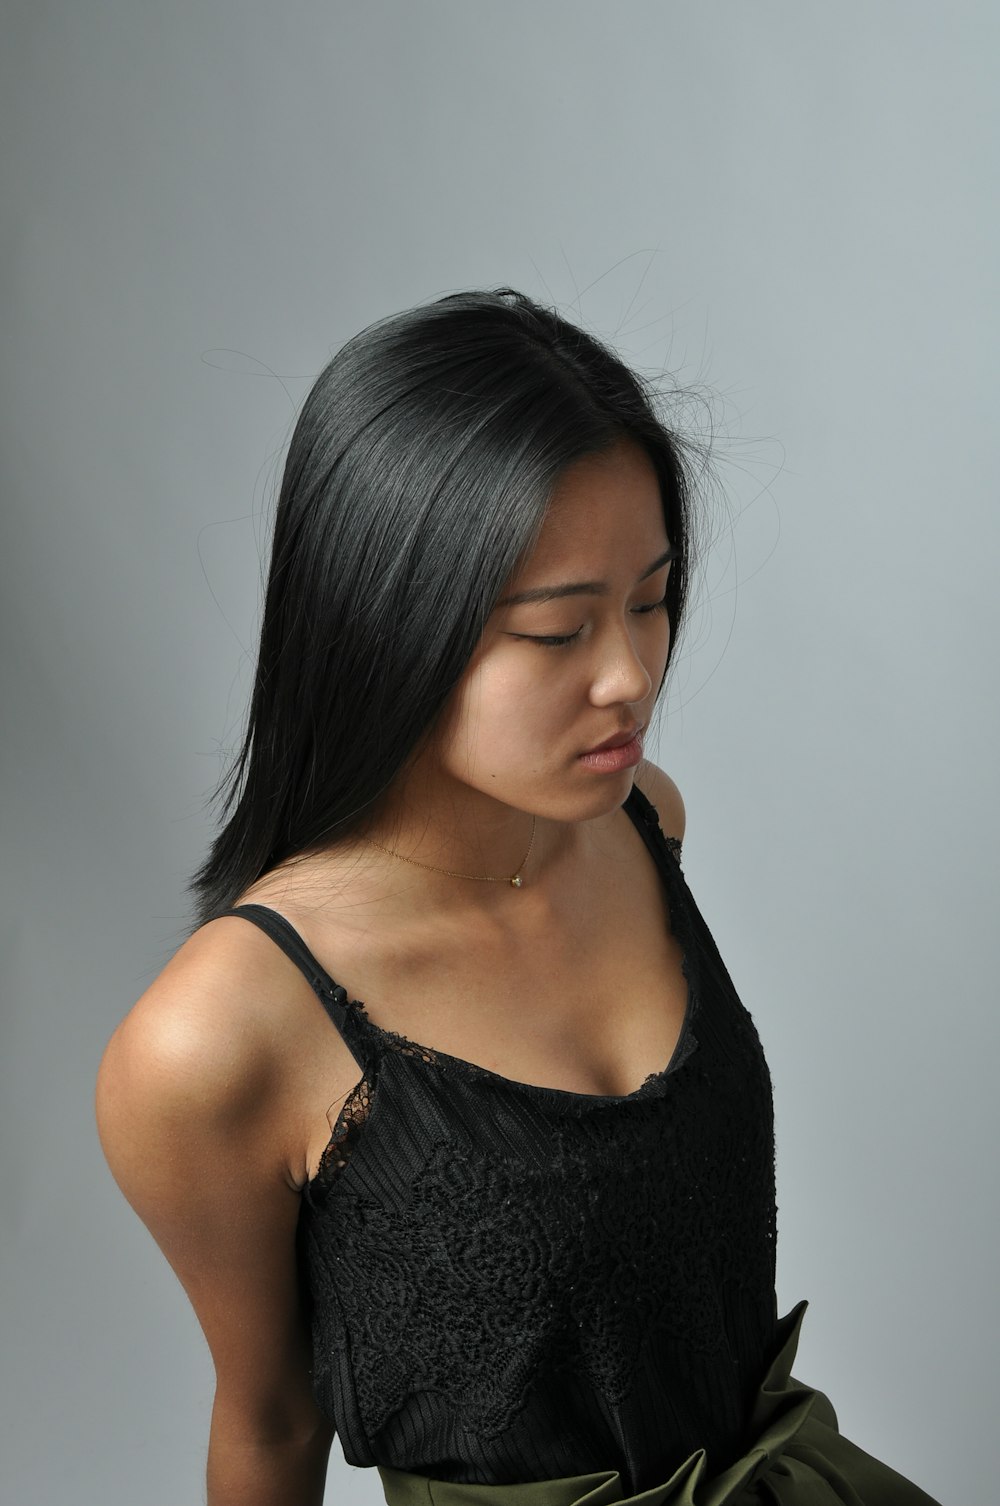 a woman with long black hair wearing a black top